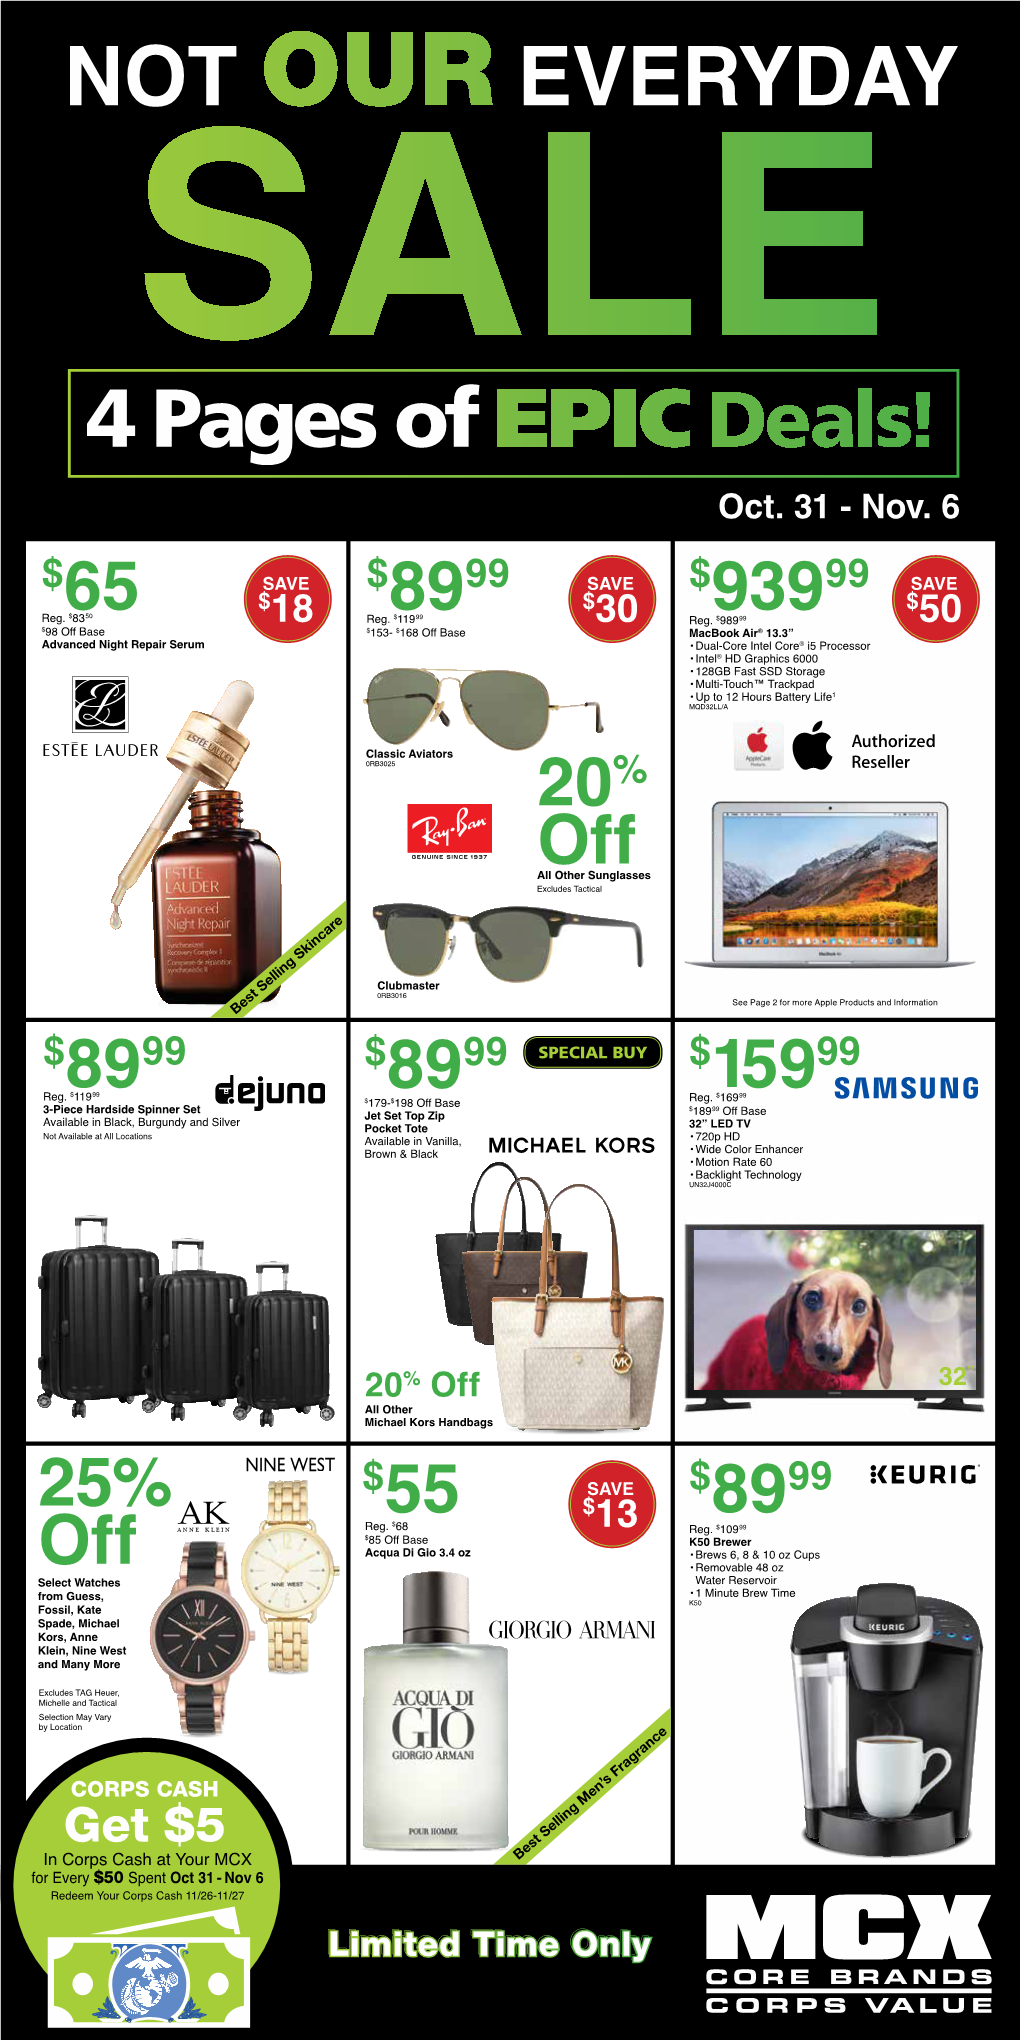 NOT OUR EVERYDAY SALE 4 Pages of EPIC Deals! Oct